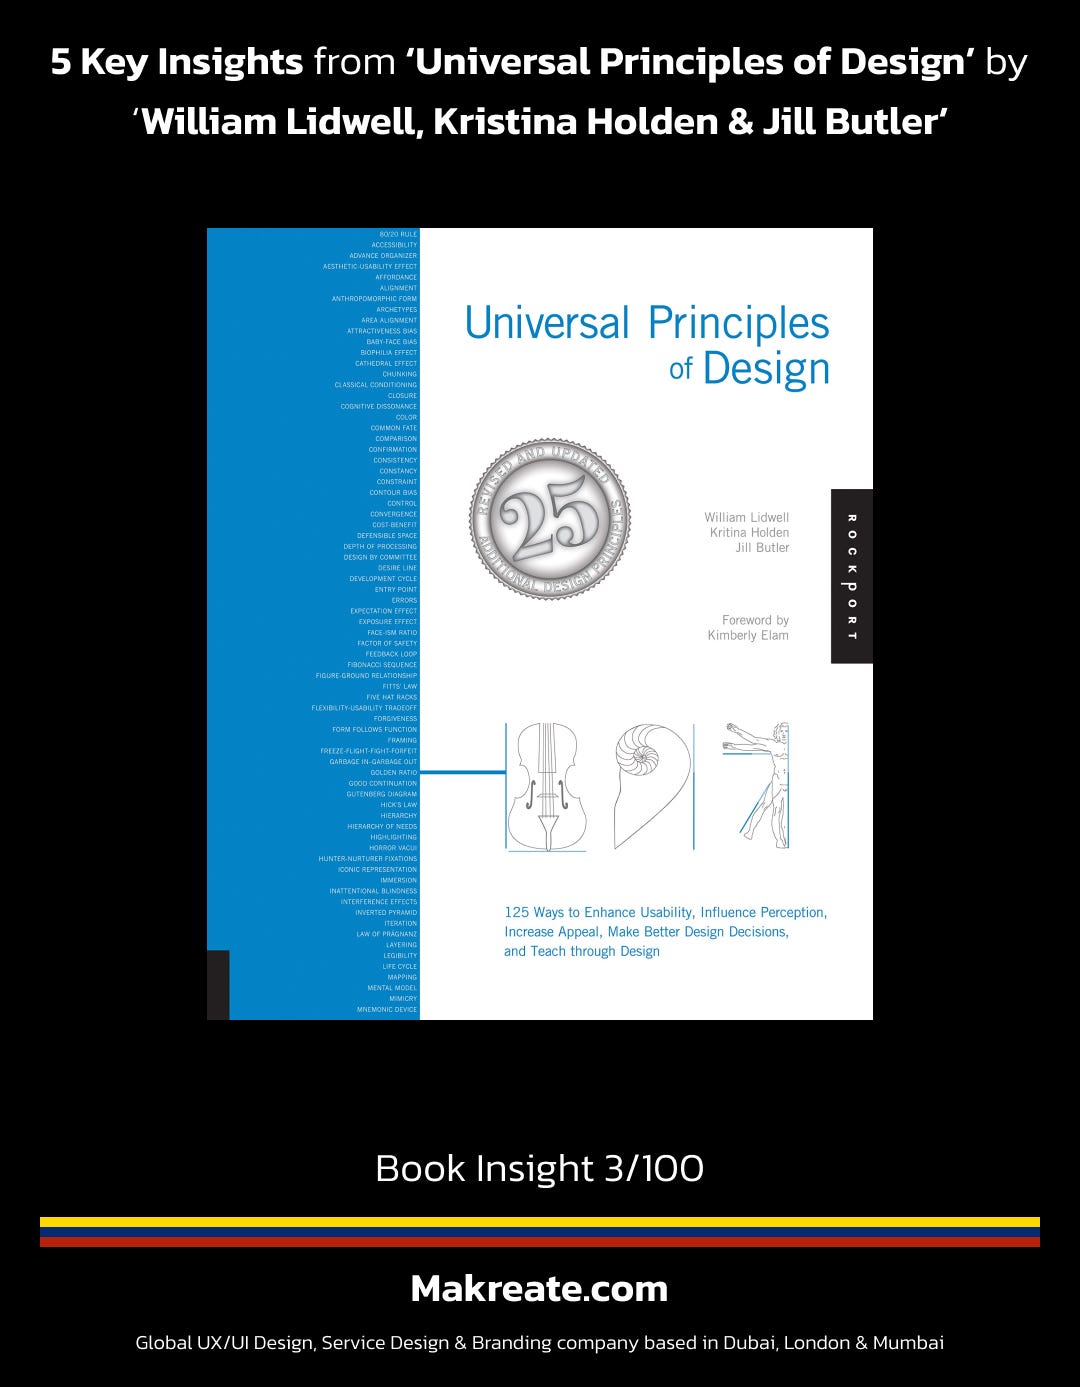 5 key insights from “Universal Principles of Design” by William Lidwell,  Kritina Holden, and Jill Butler | by Murtaza K | Bootcamp